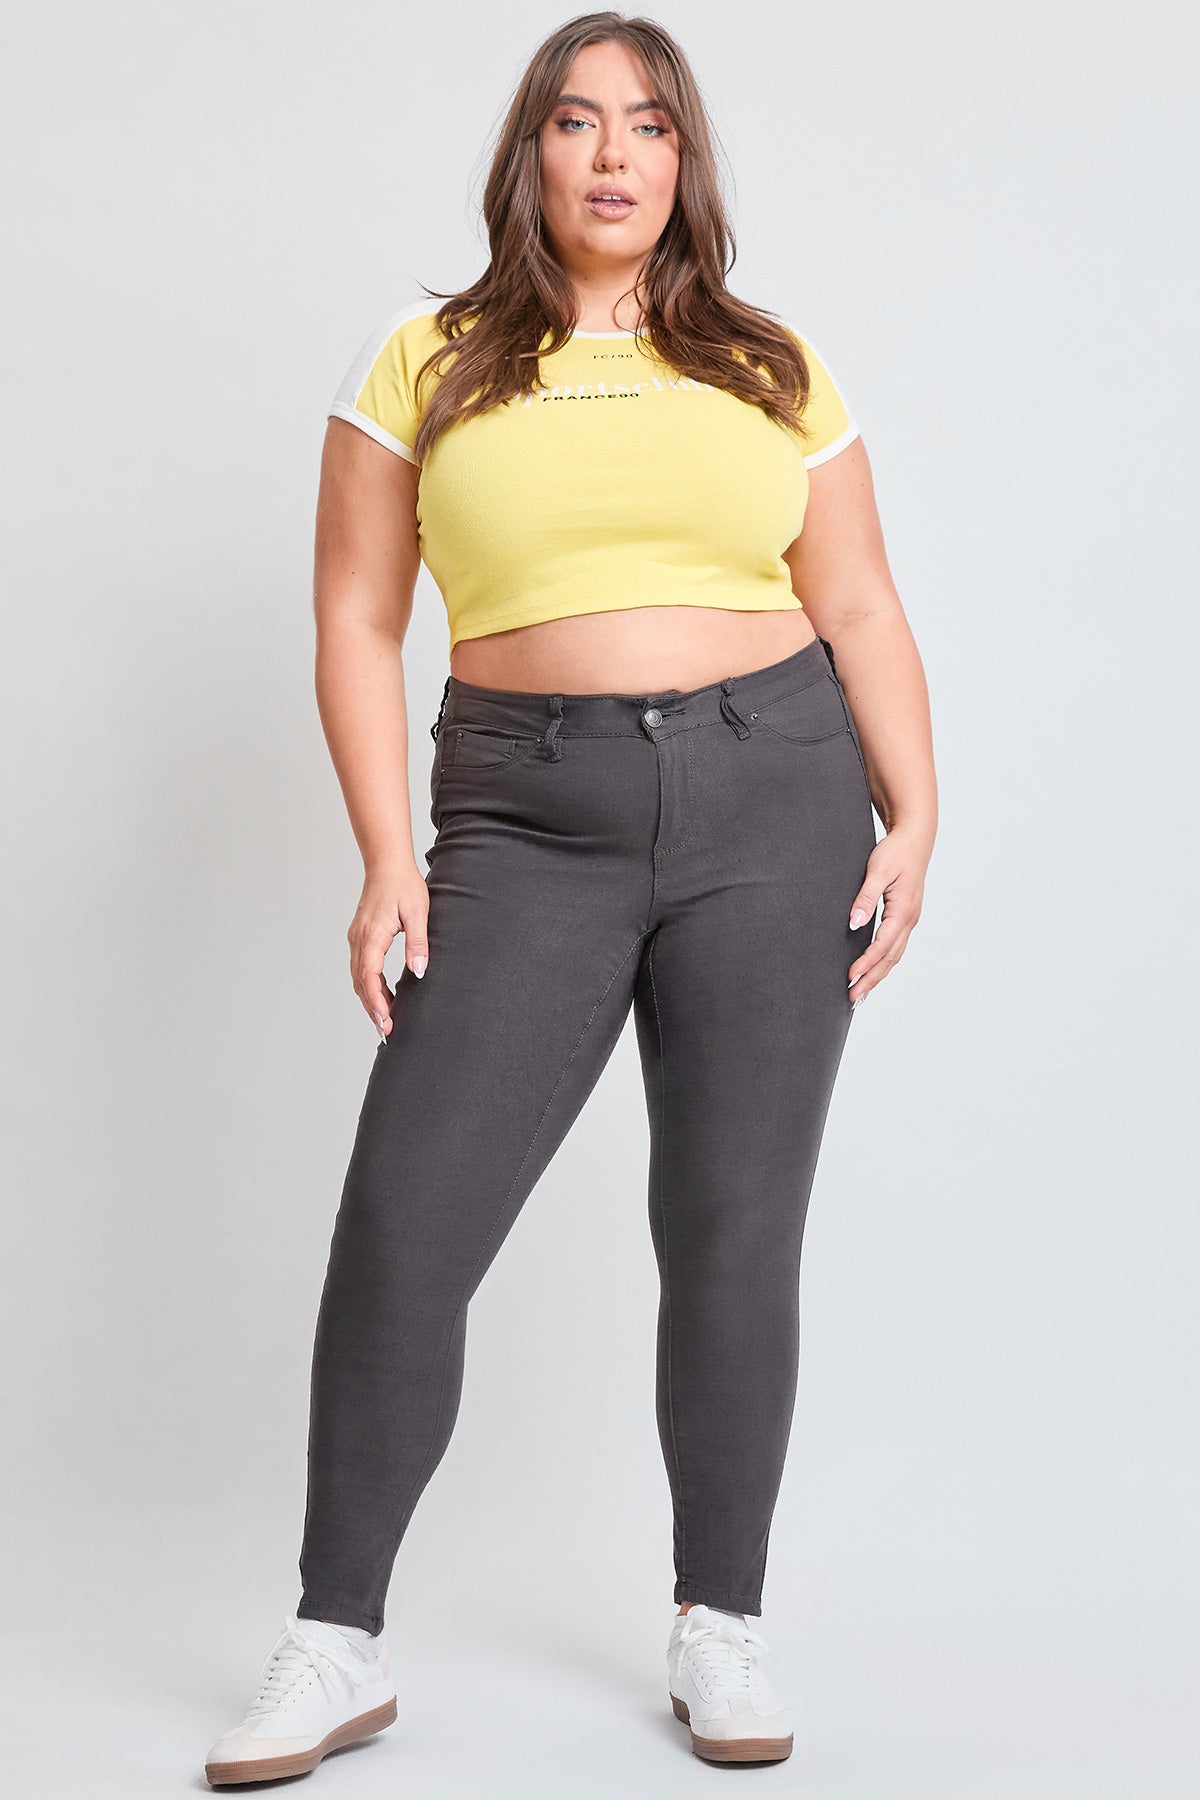 Plus Size Women's Hyperstretch Forever Color Mid Rise Pants